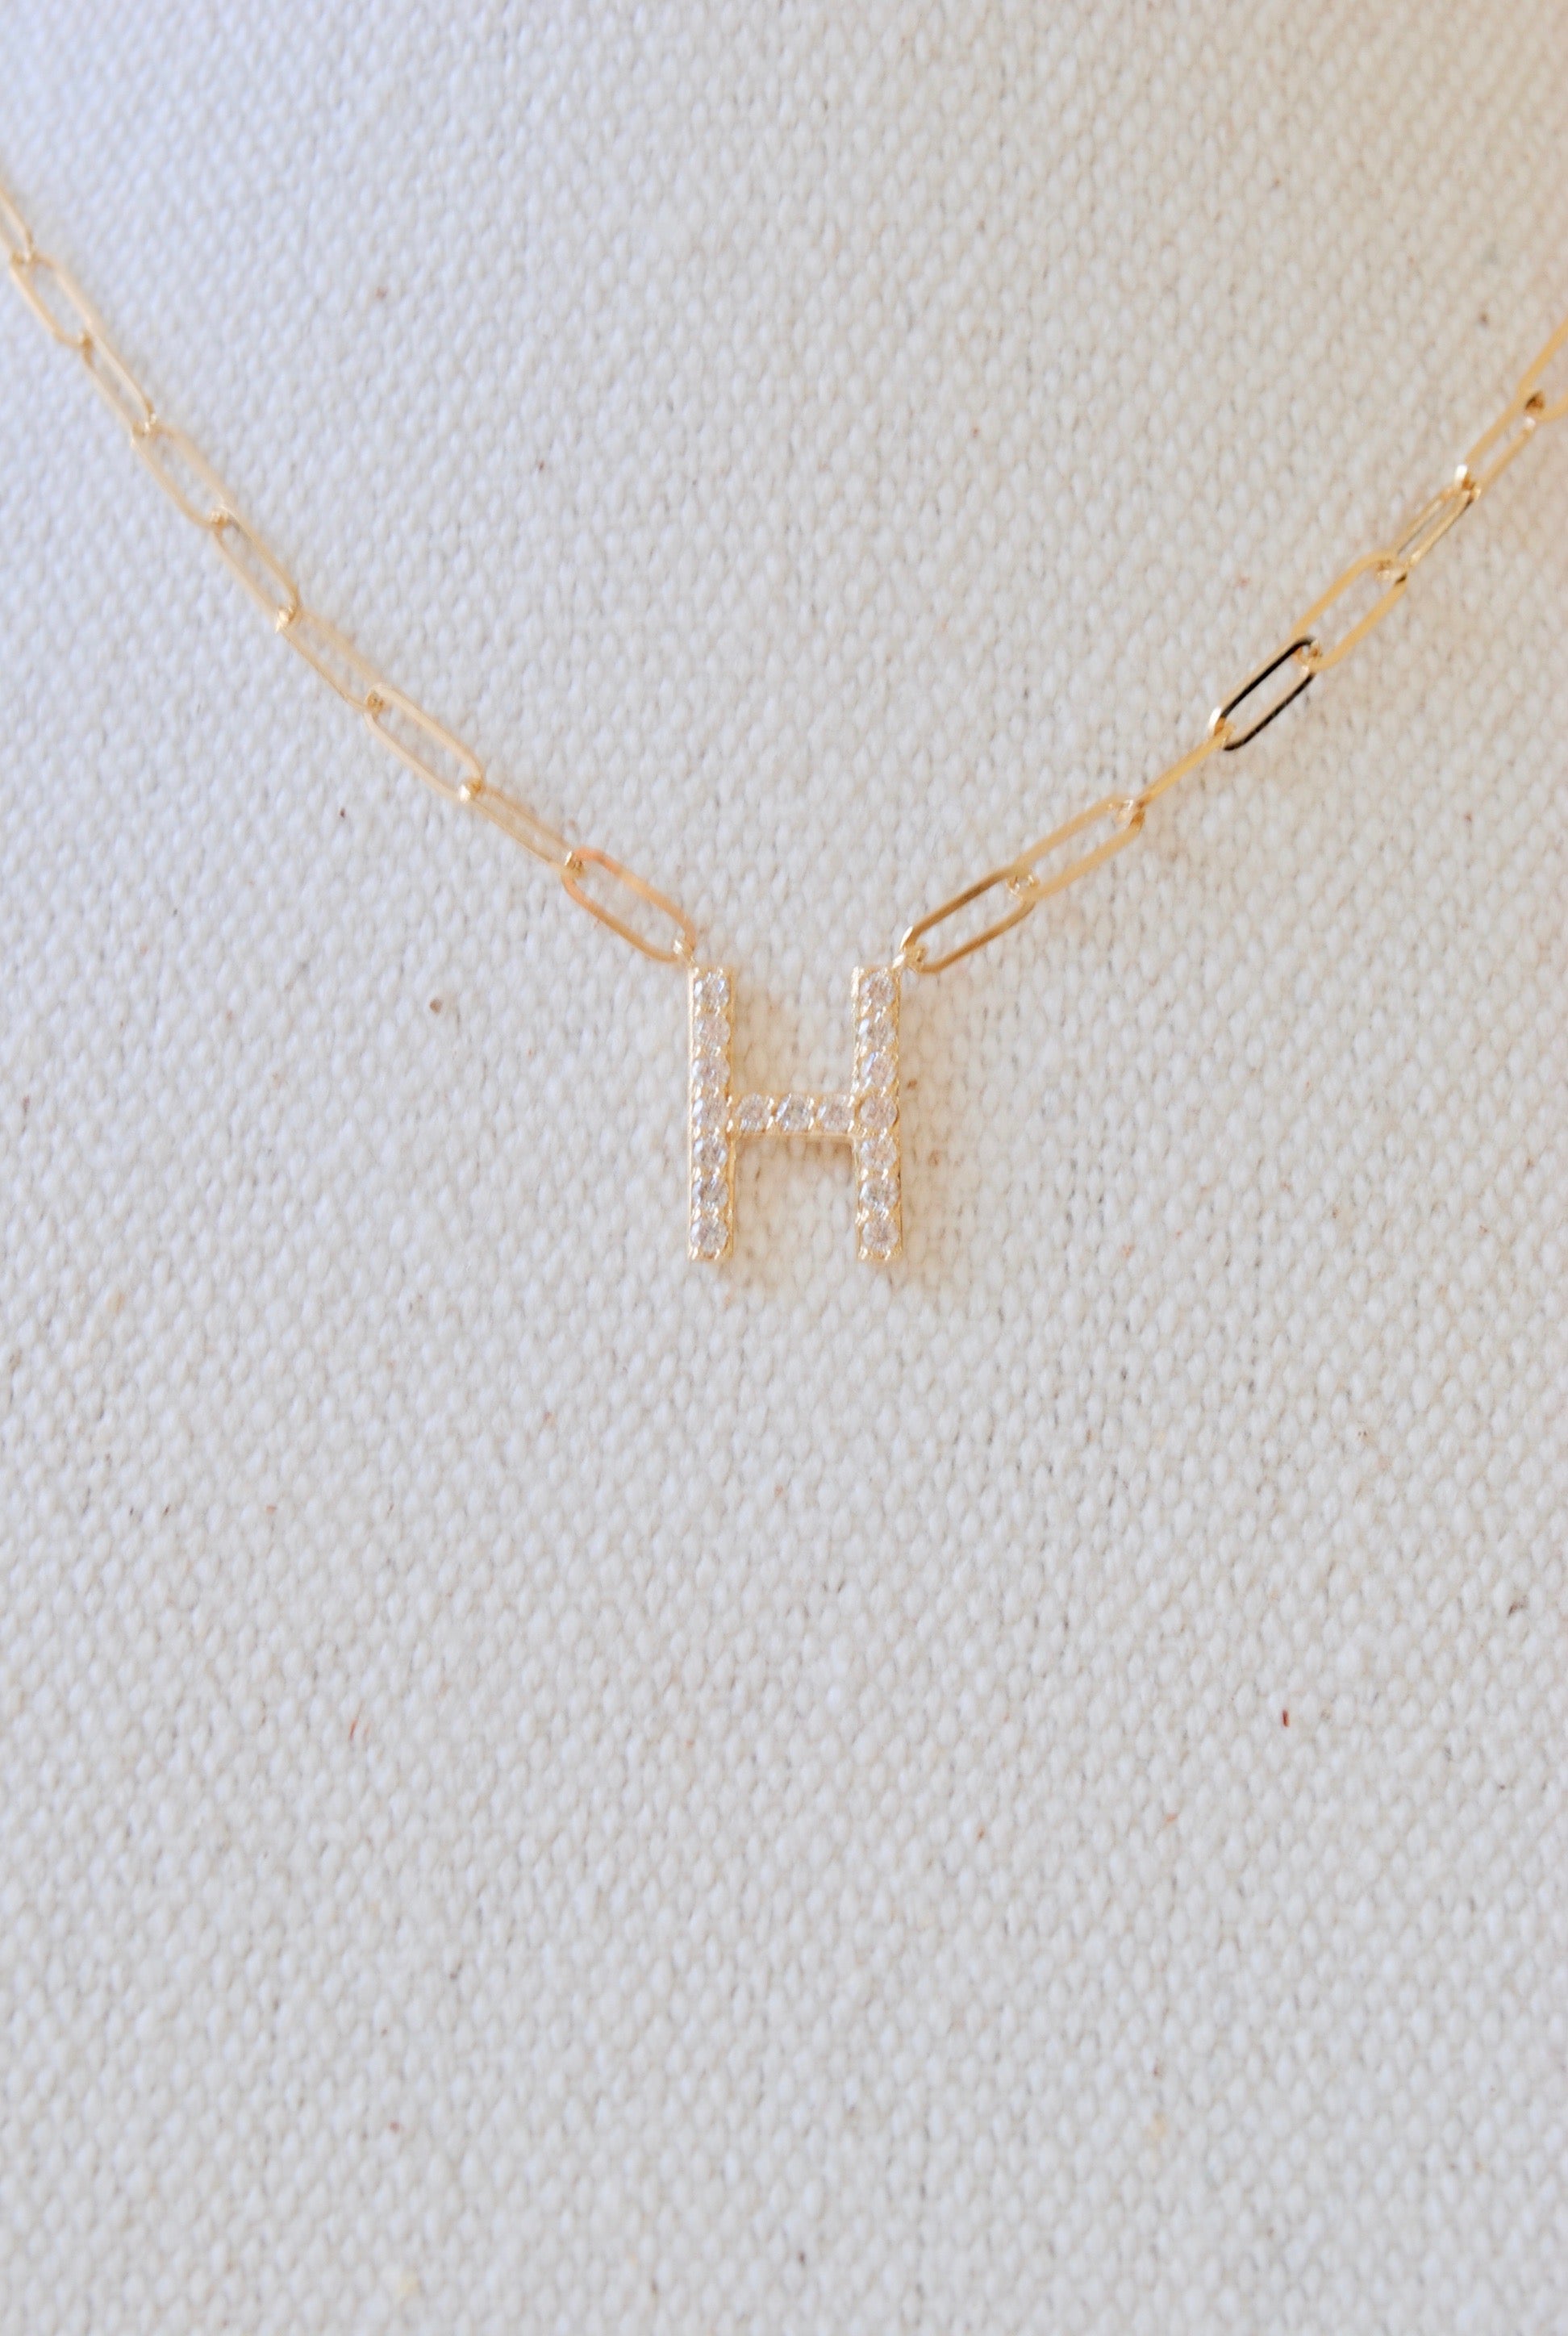 14K and Diamond Initial Necklace